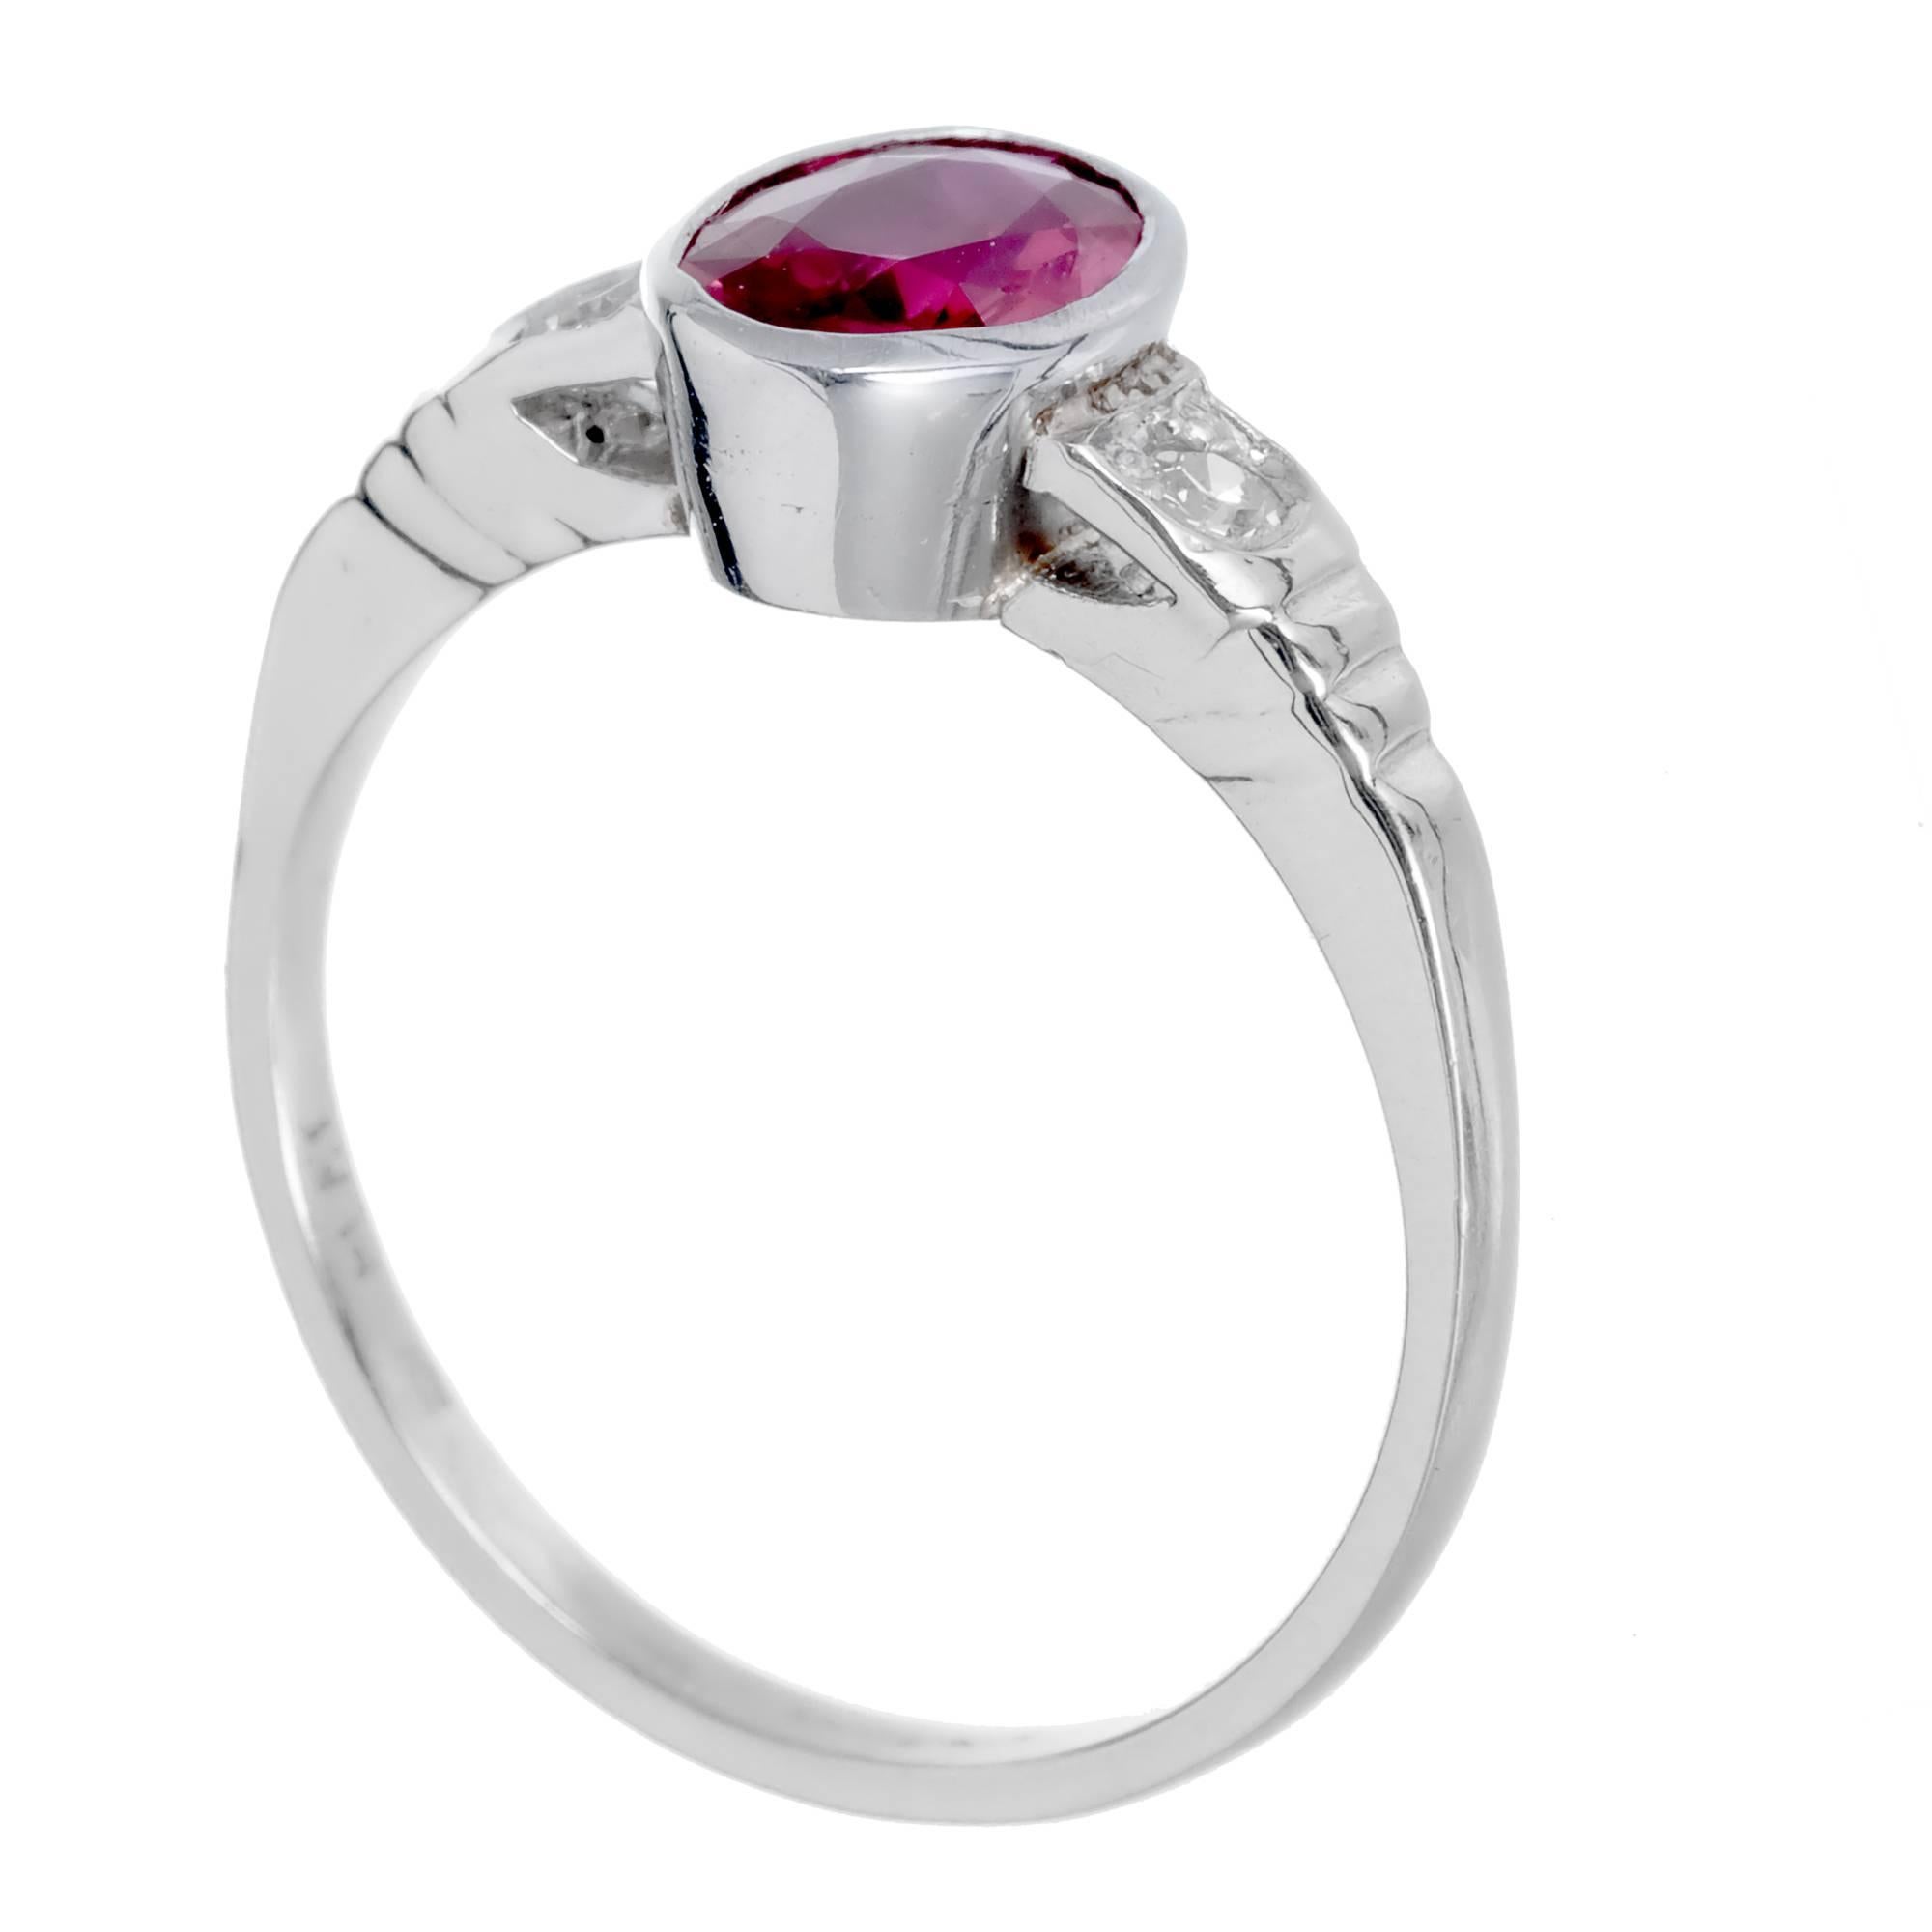 Women's Art Deco Red Oval Natural Ruby Diamond Platinum Engagement Ring For Sale